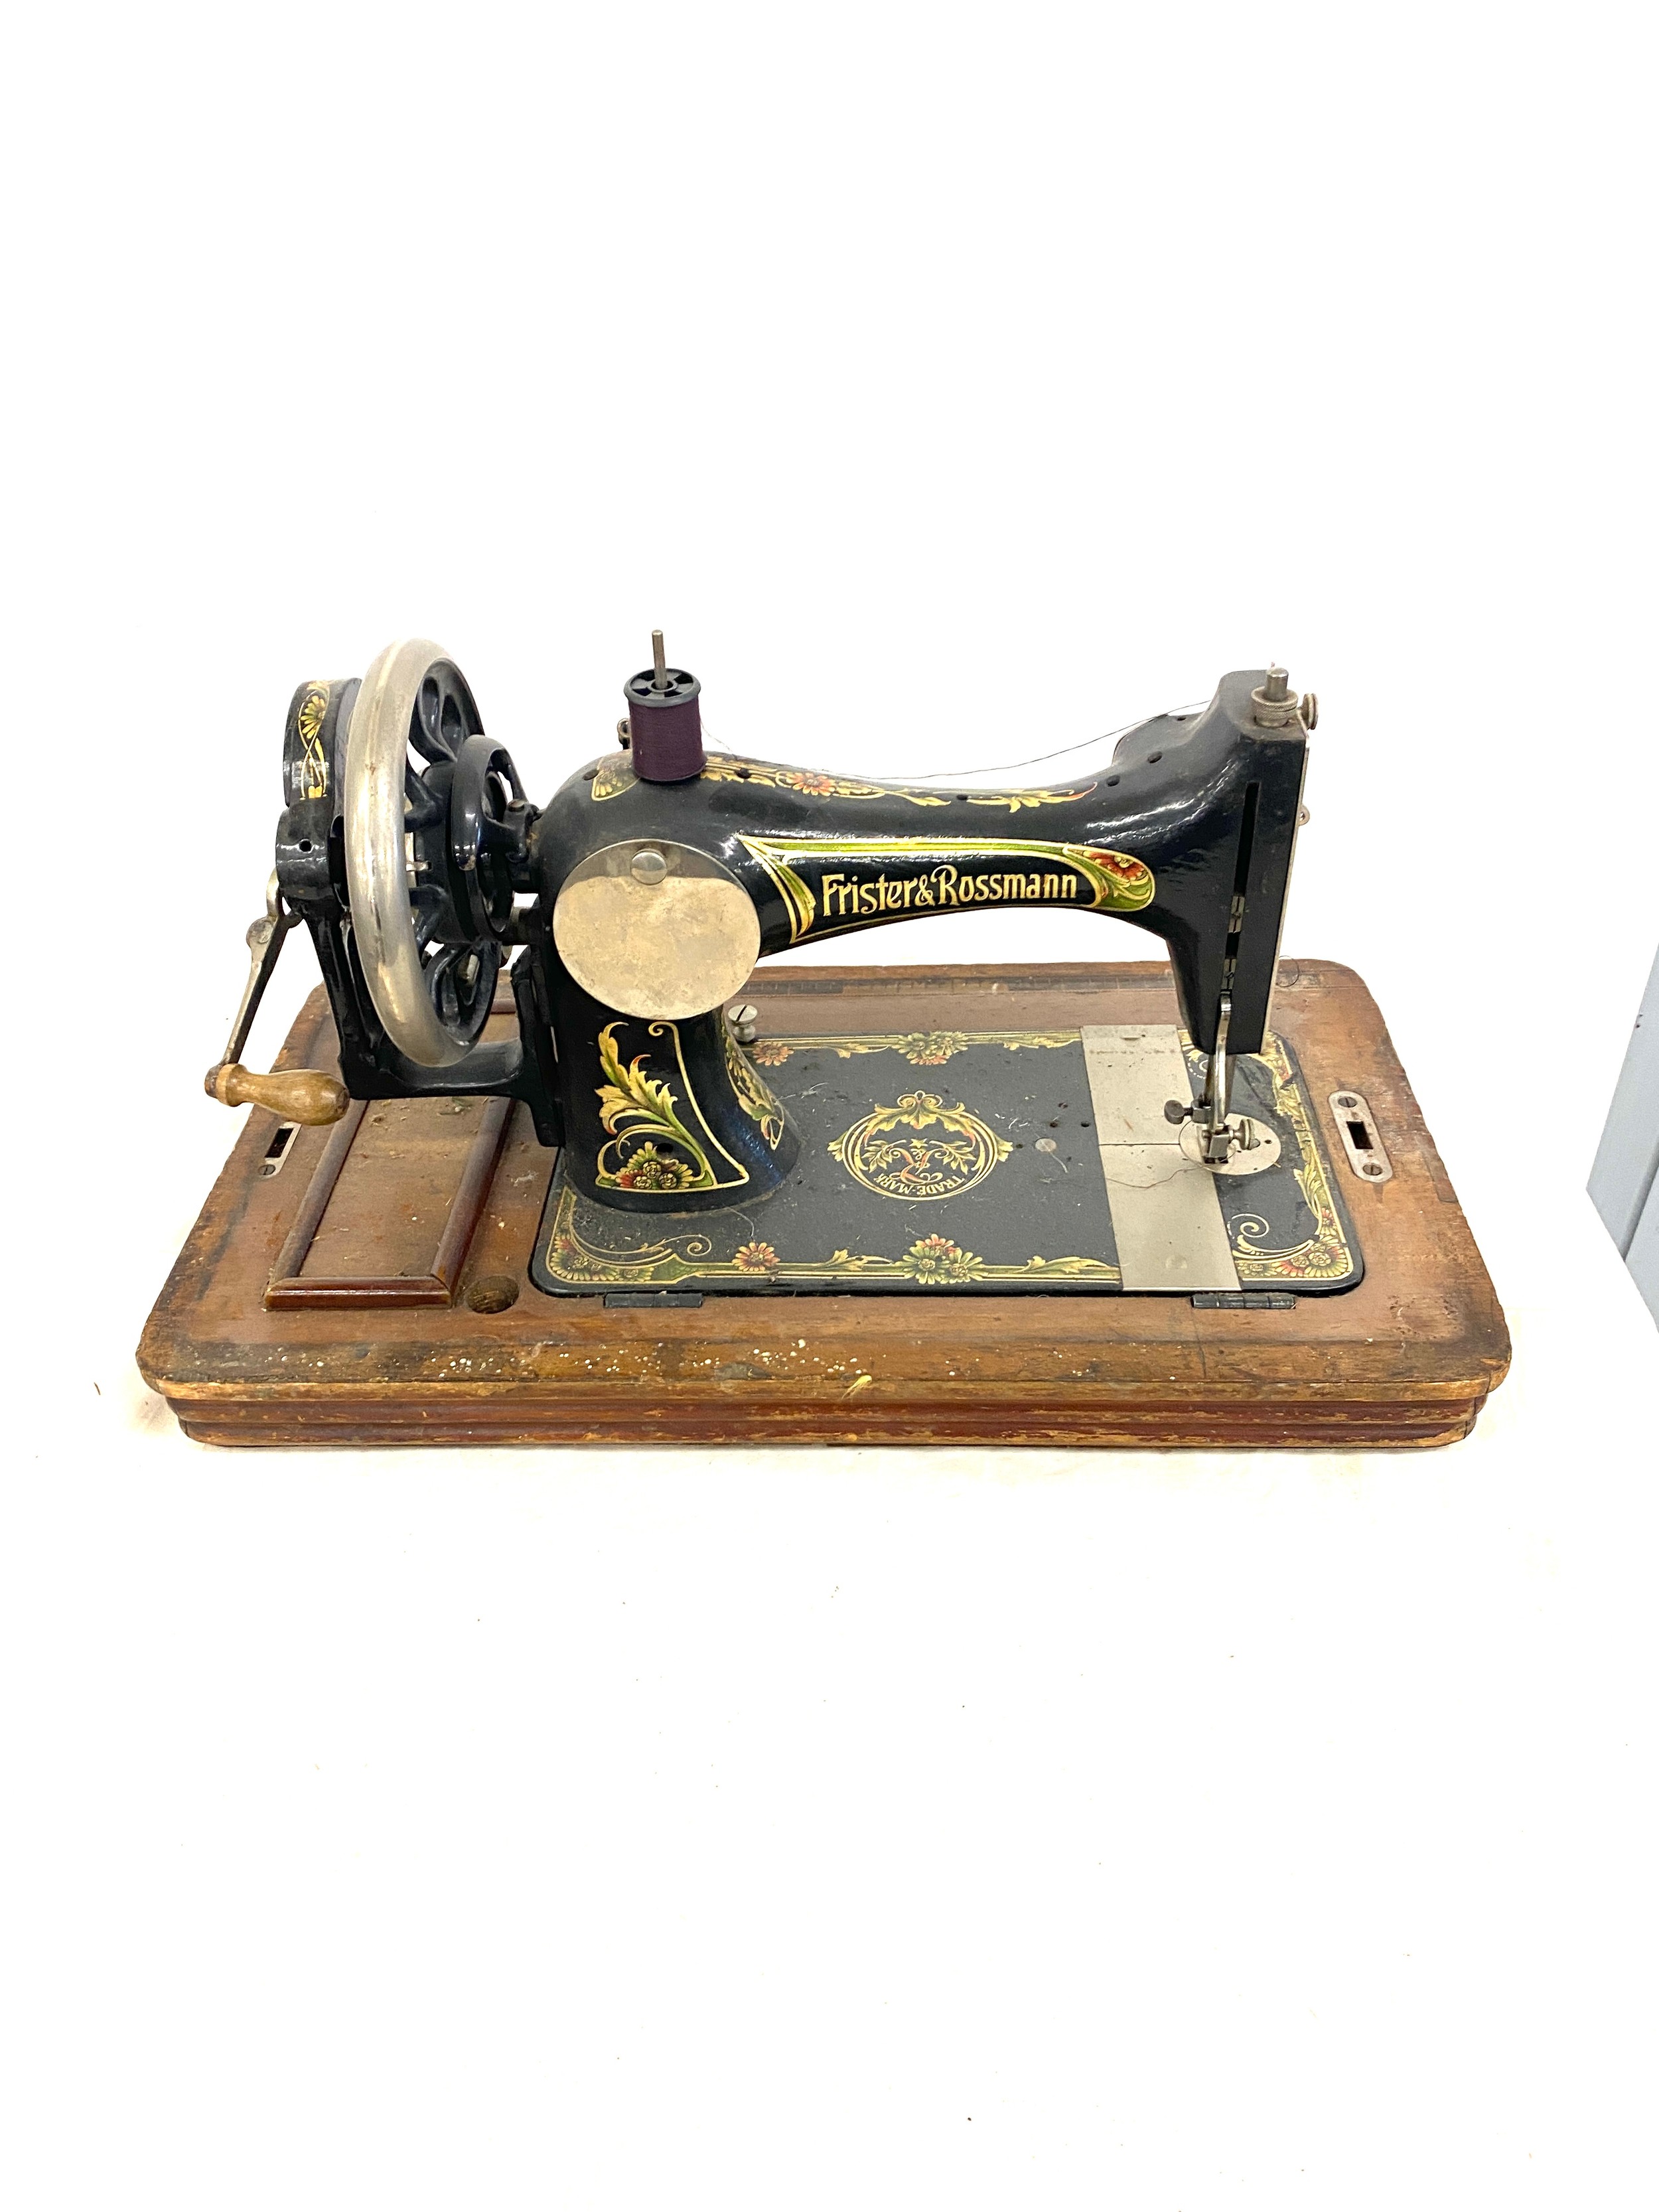 Vintage cased Frister and Rossmann sewing machine